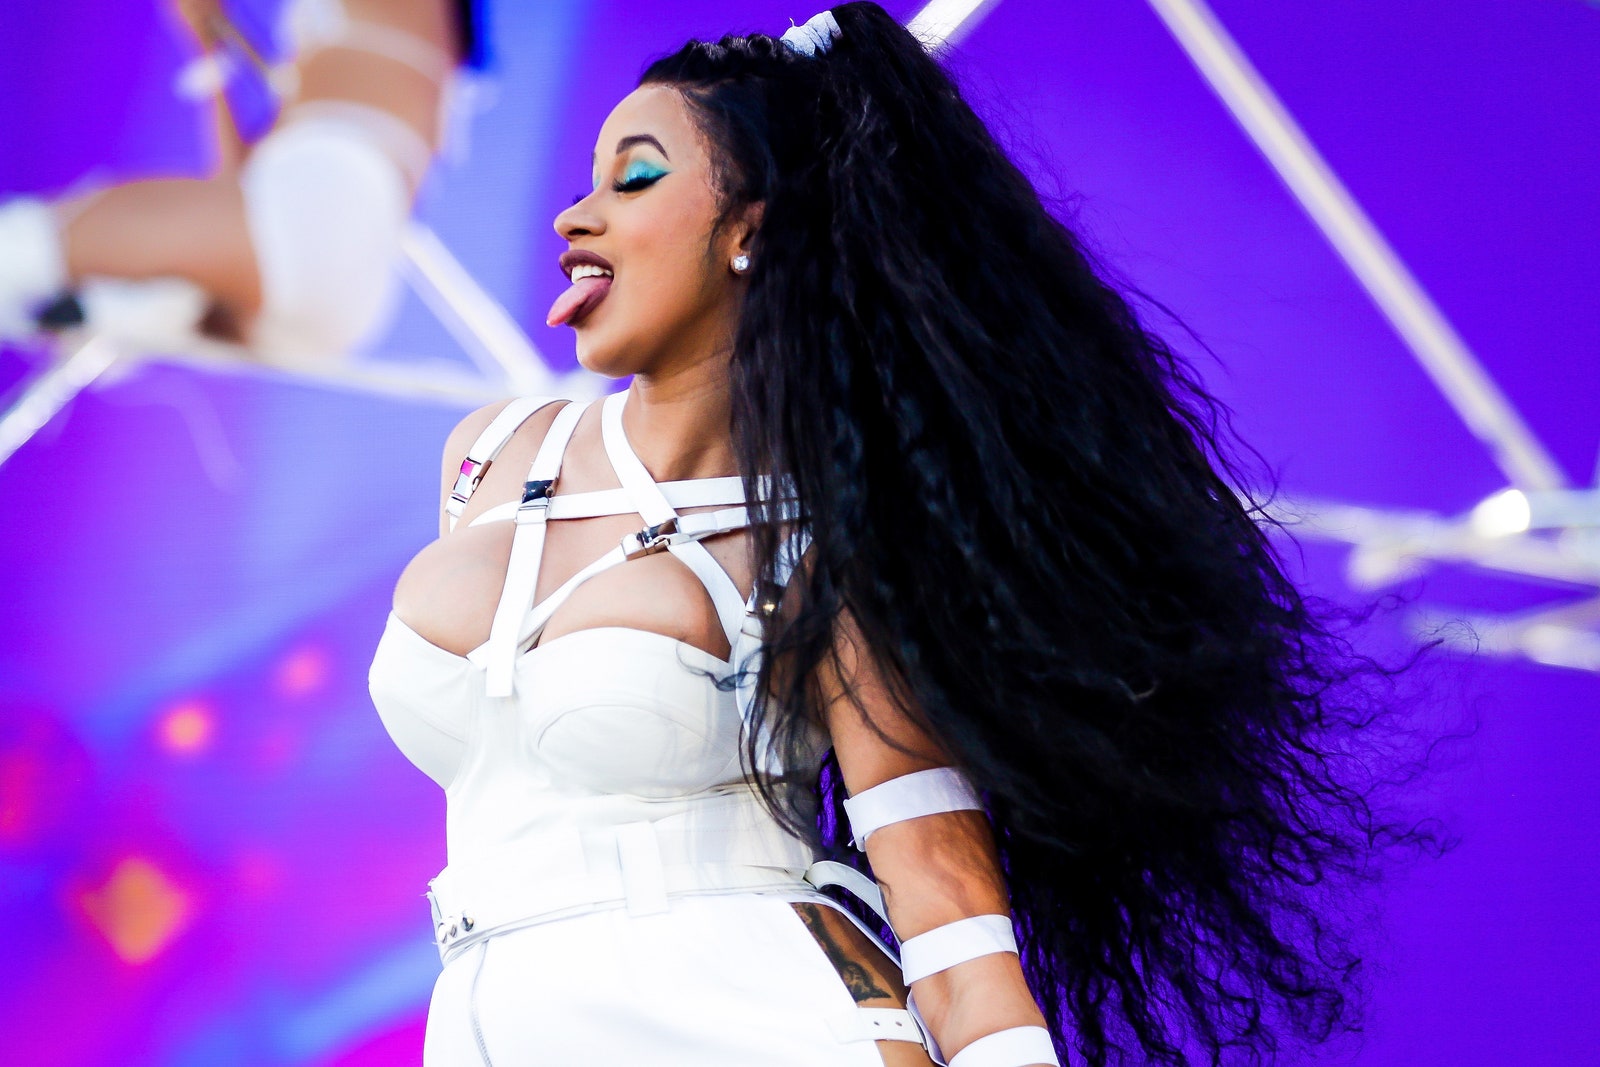 Cardi B performs onstage during the 2018 Coachella Valley Music And Arts Festival